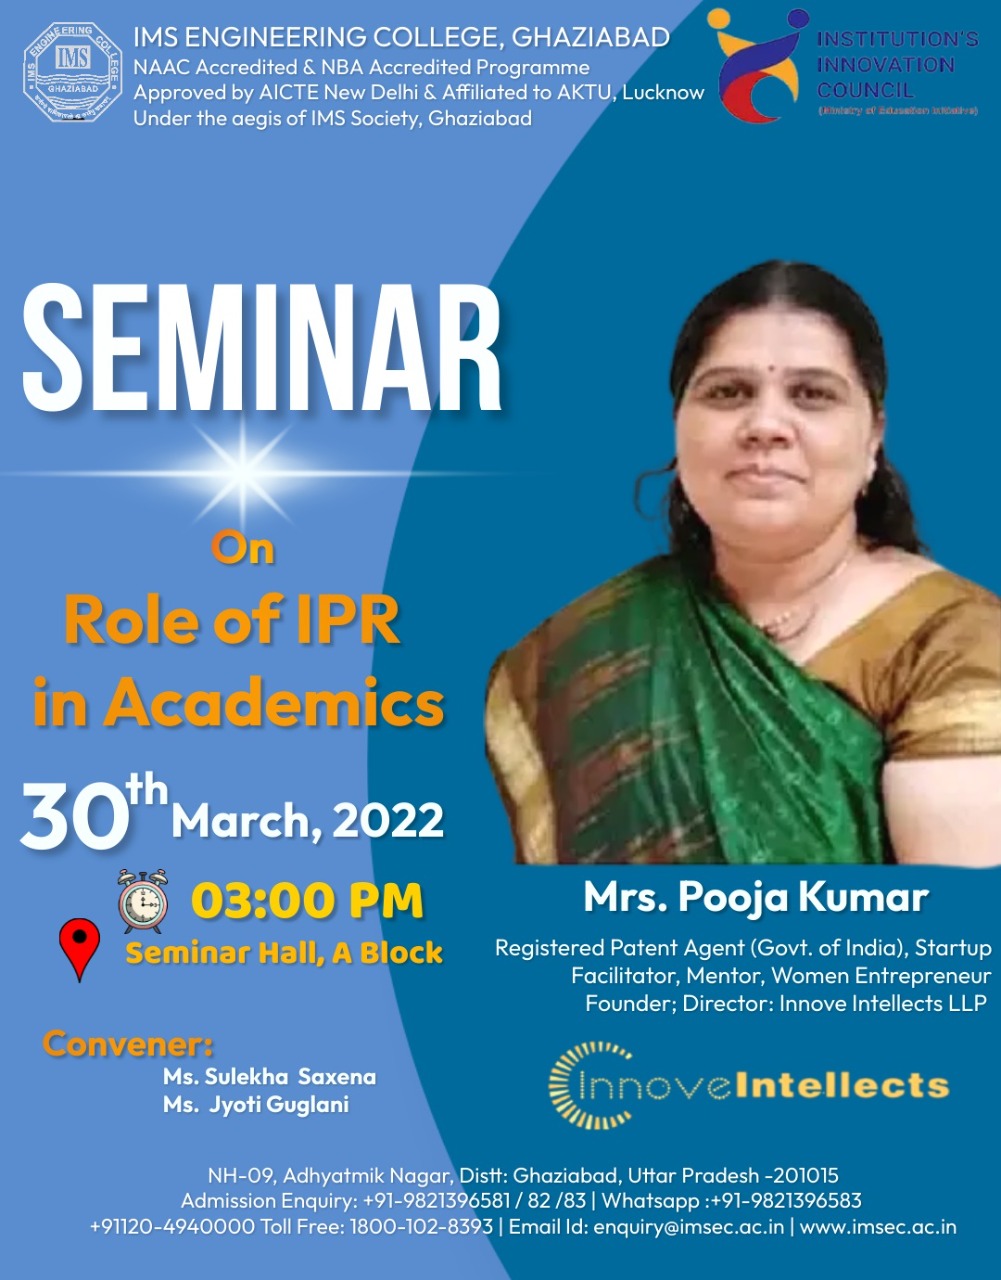 Seminar on the Role of IPR in Academics